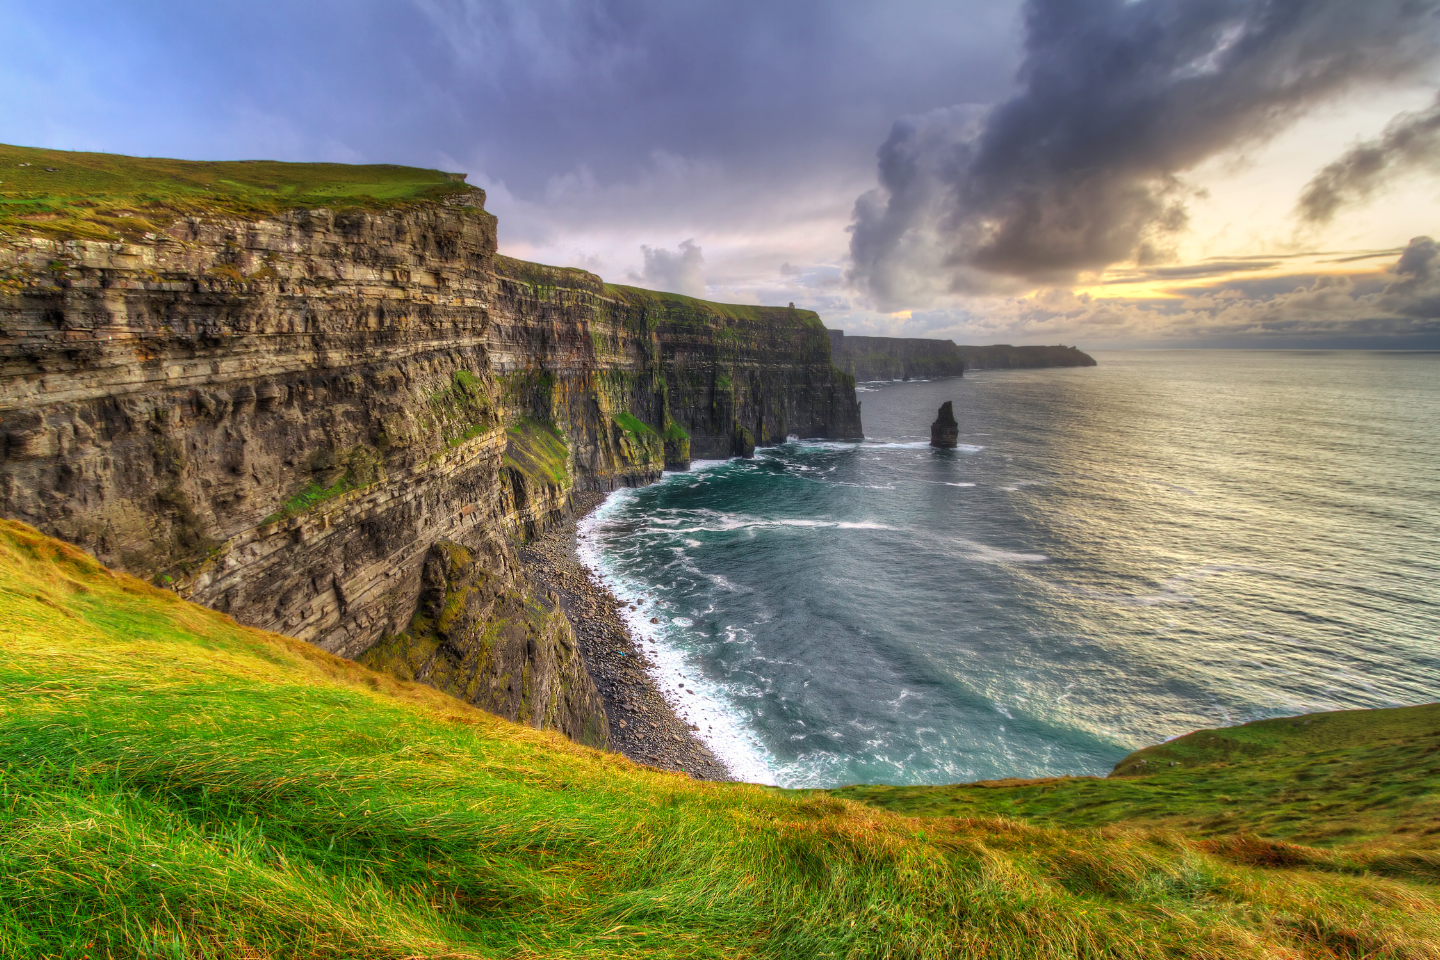 The Charms of the Ireland Emerald Isle, Natural Beauty and Cultural Treasures